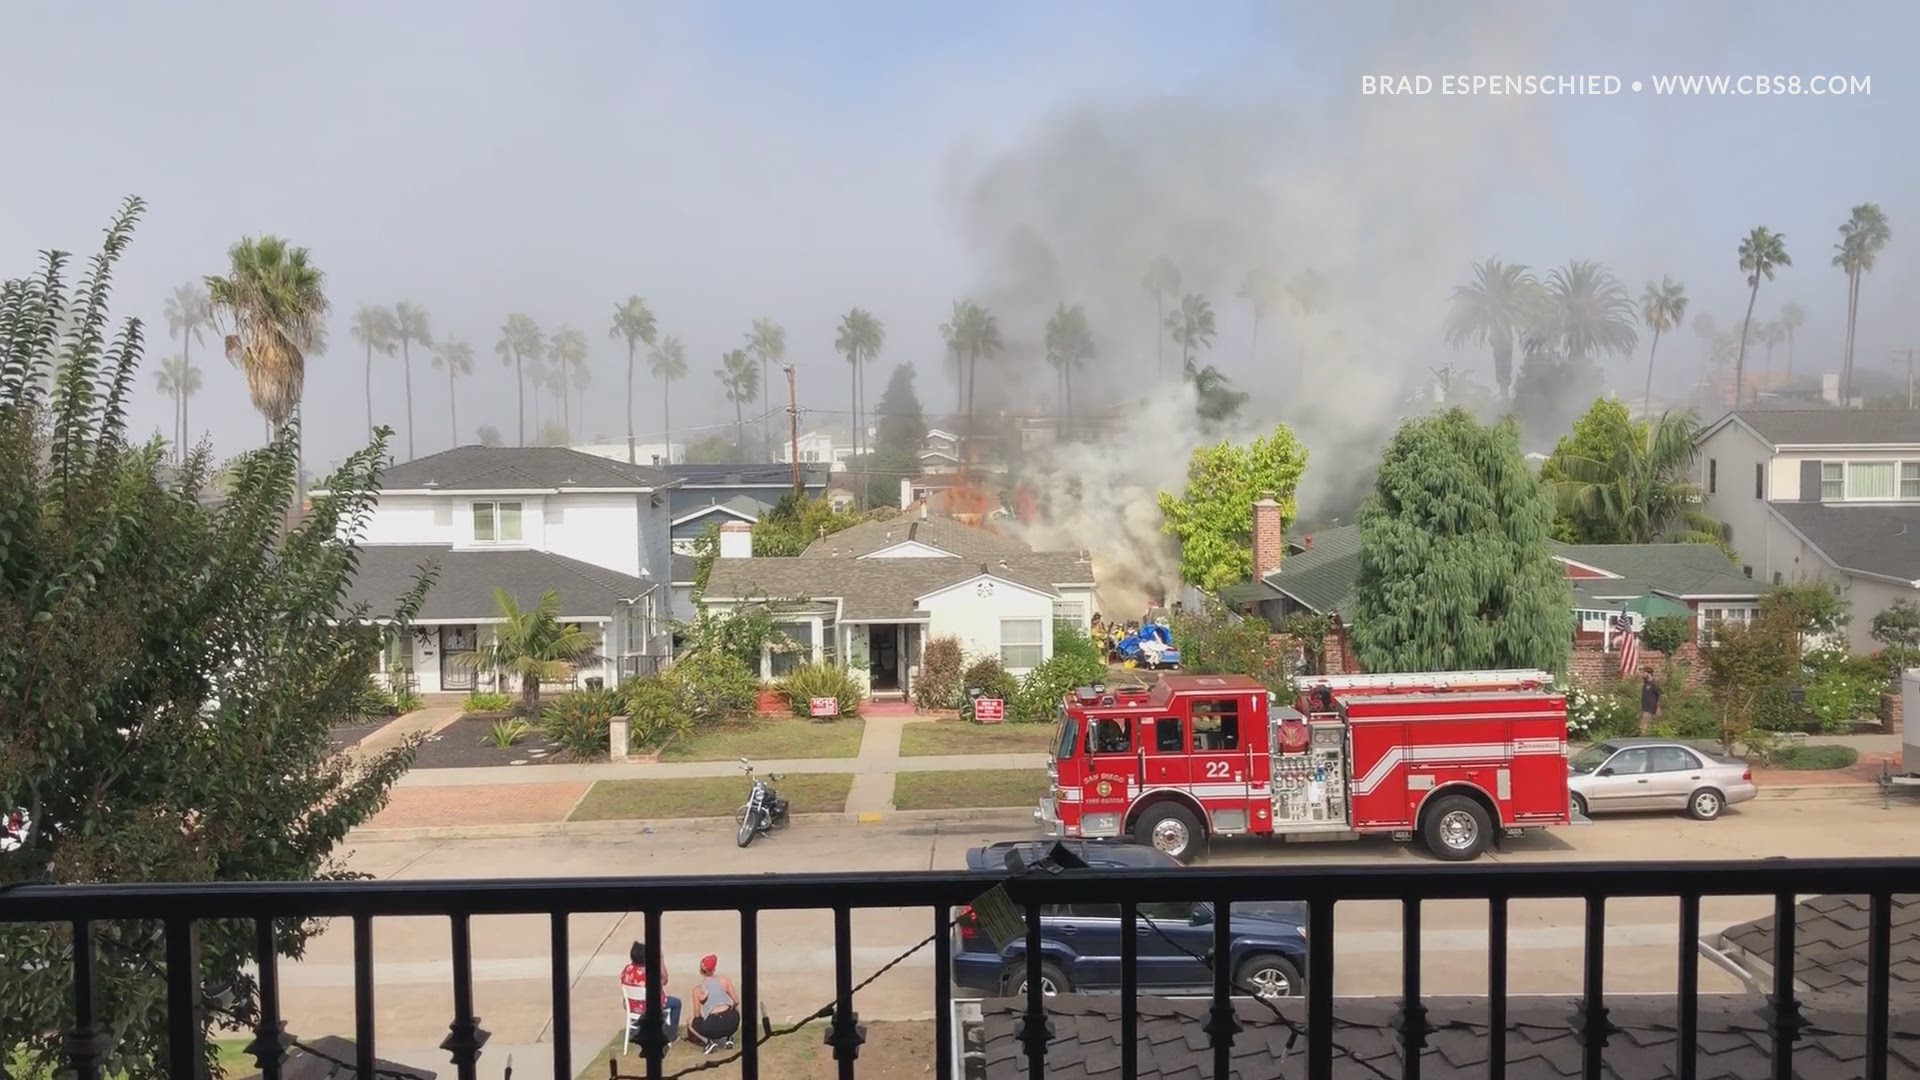 An SDFD chief confirmed that dozens of rounds of ammo went off when the garage of the house was burning.